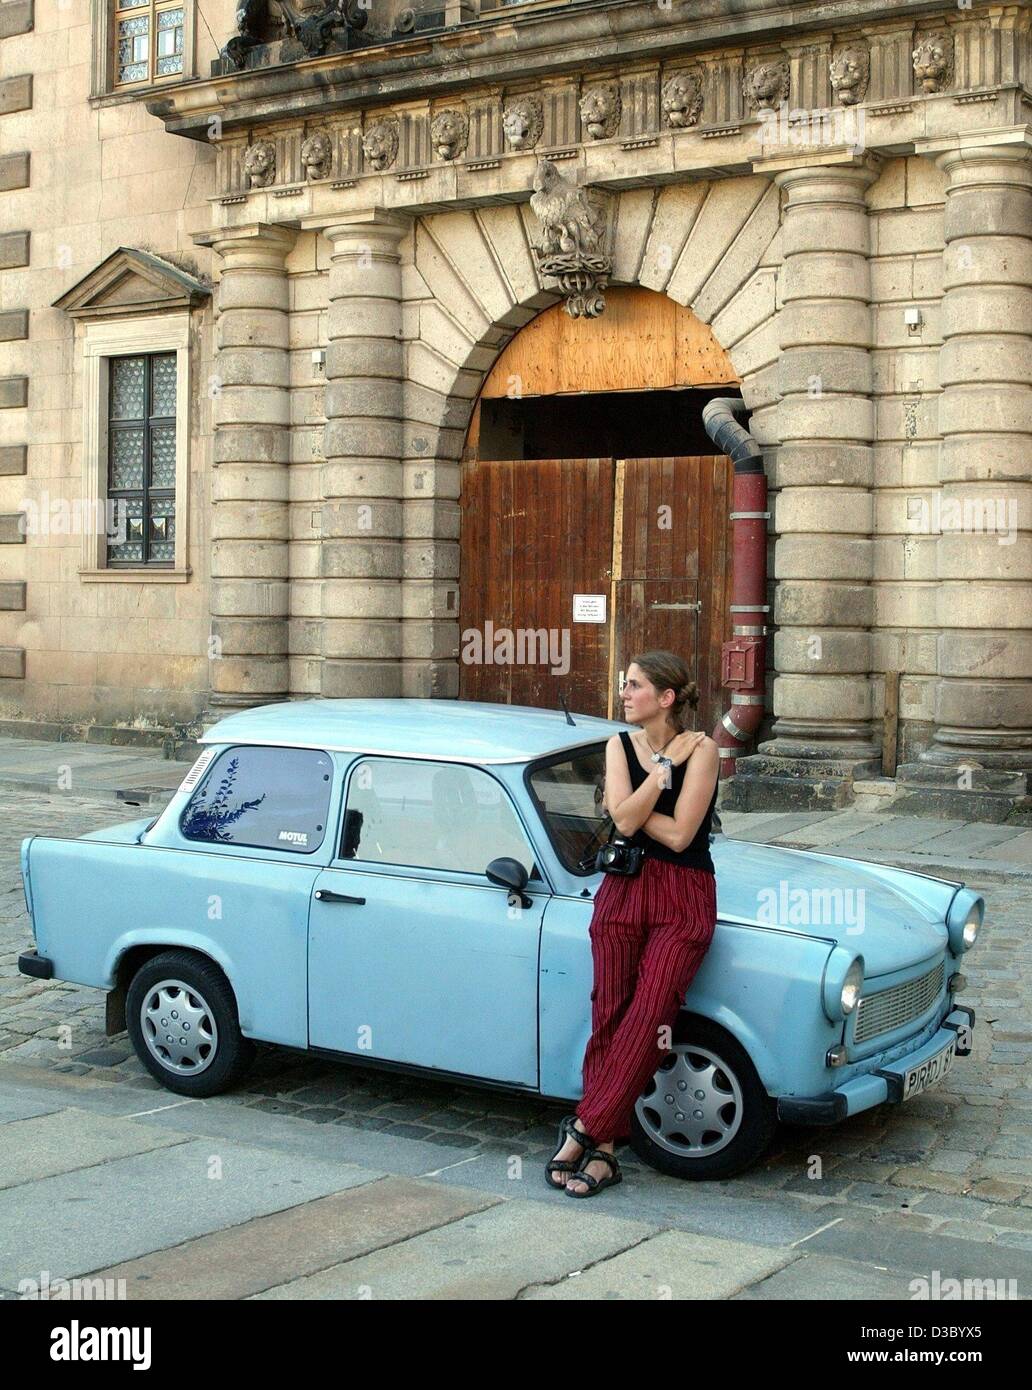 (dpa) - A young woman leans on a baby blue East German Trabant automobile, nicknamed 'Trabi' by the general public, in Dresden, eastern Germany, 20 July 2003. The little east German cars of the former GDR are still a favorite with car collectors and car fans. Stock Photo